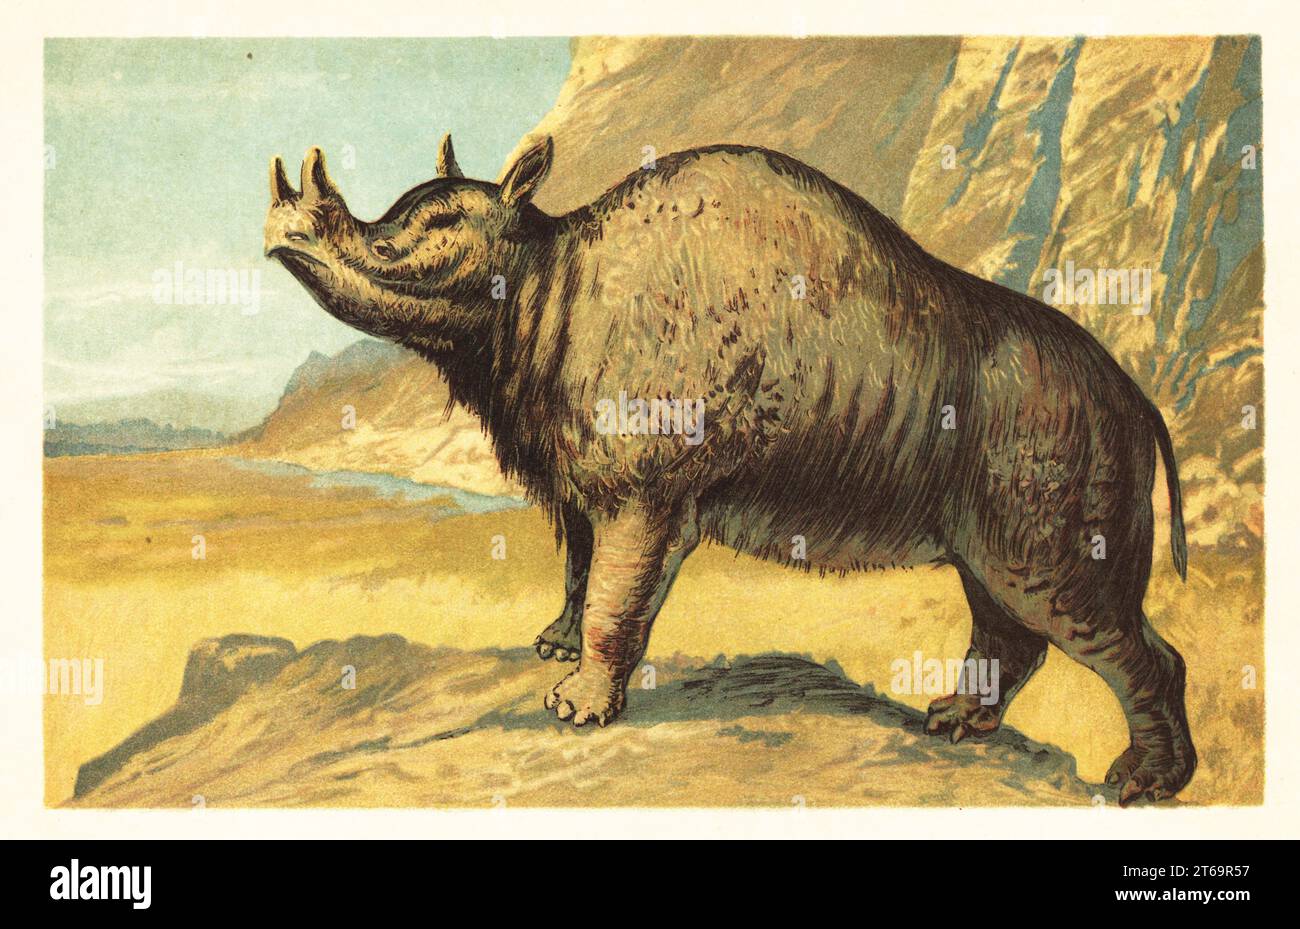 Brontops robustus or Megacerops robustus, extinct species of odd-toed ungulate, rhinoceros-like browser of the Late Eocene. Brontops, Titanotherium robustum Leidy.Colour printed illustration by F. John from Wilhelm Bolsches Tiere der Urwelt (Animals of the Prehistoric World), Reichardt Cocoa company, Hamburg, 1908. Stock Photo